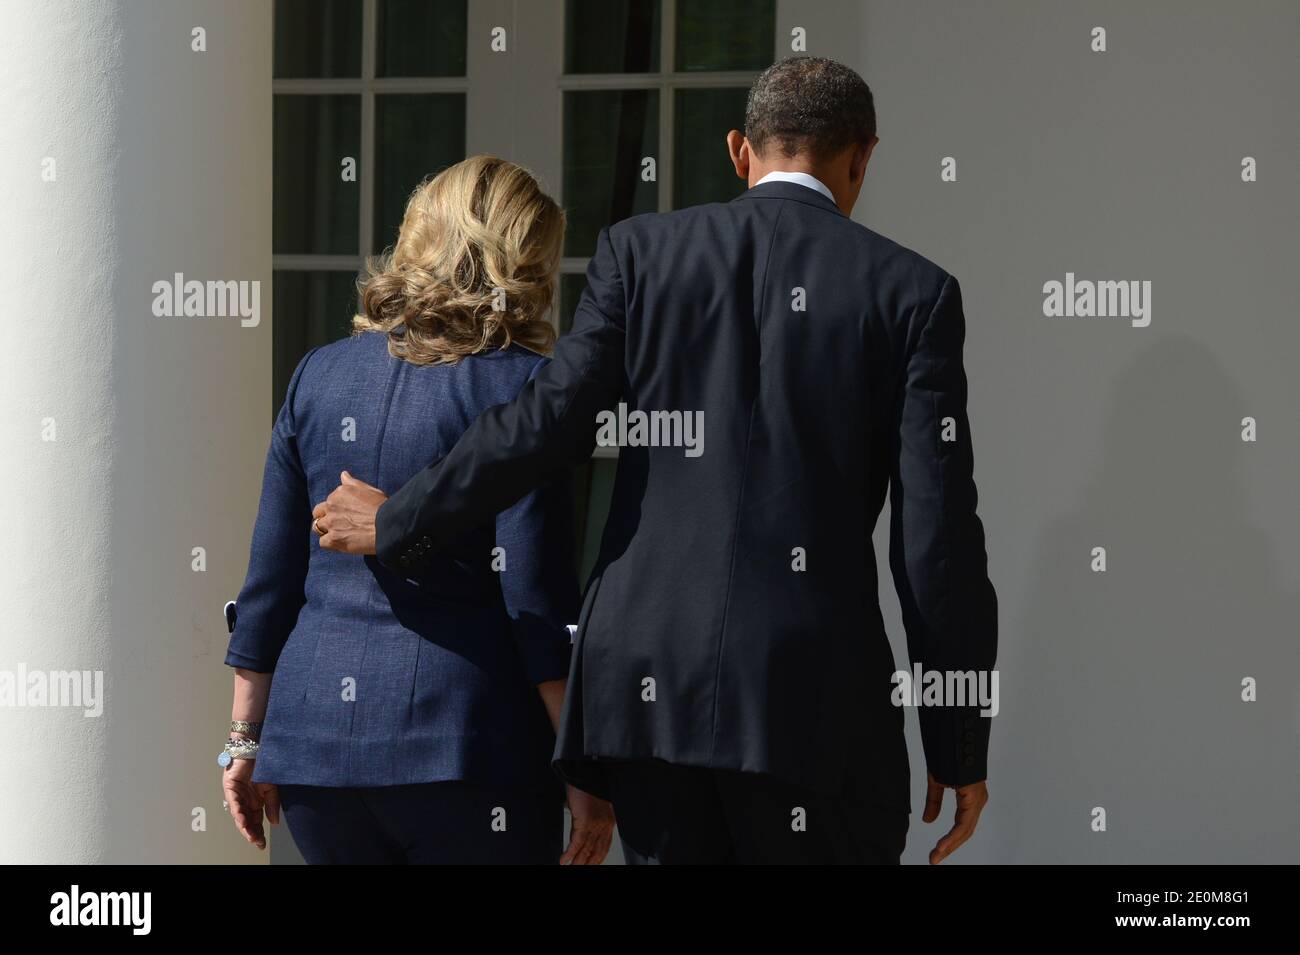 US President Barack Obama (R) walks out of the Rose Garden with US Secretary of State Hillary Clinton (L) after delivering remarks on the killing of US ambassador to Libya, Christopher Stevens, and three embassy staff, at the White House in Washington DC, USA on September 12, 2012. Gunmen attacked the US consulate in Benghazi, killing US ambassador to Libya, Christopher Stevens, late 11 September 2012, while another assault took place on the US embassy in Cairo. Photo by Michael Reynolds/Pool/ABACAPRESS.COM Stock Photo